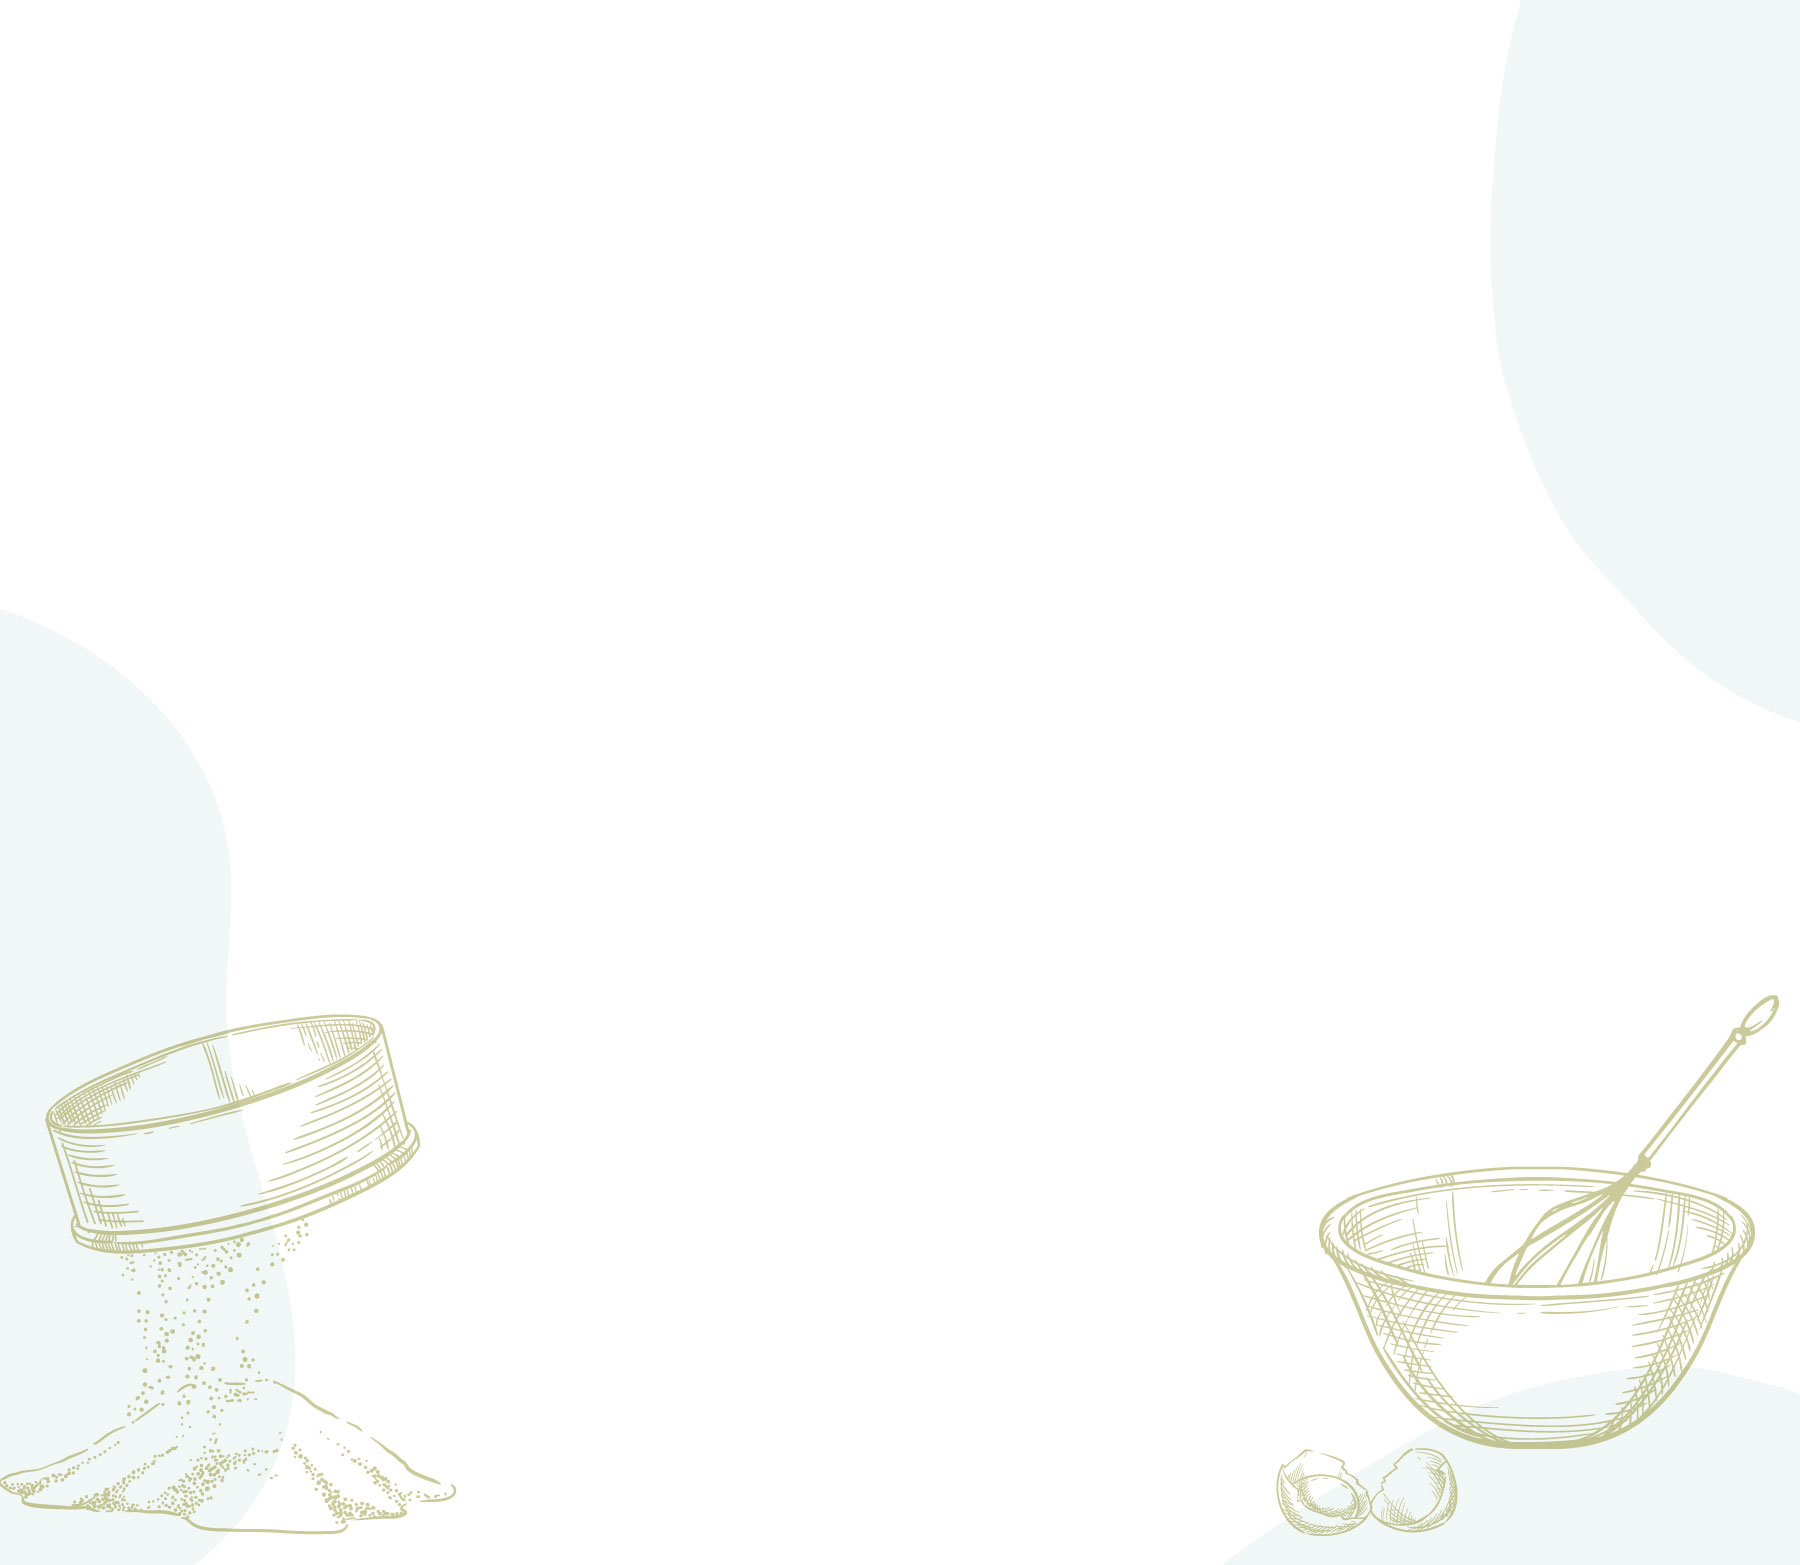 Illustration of cooking ware